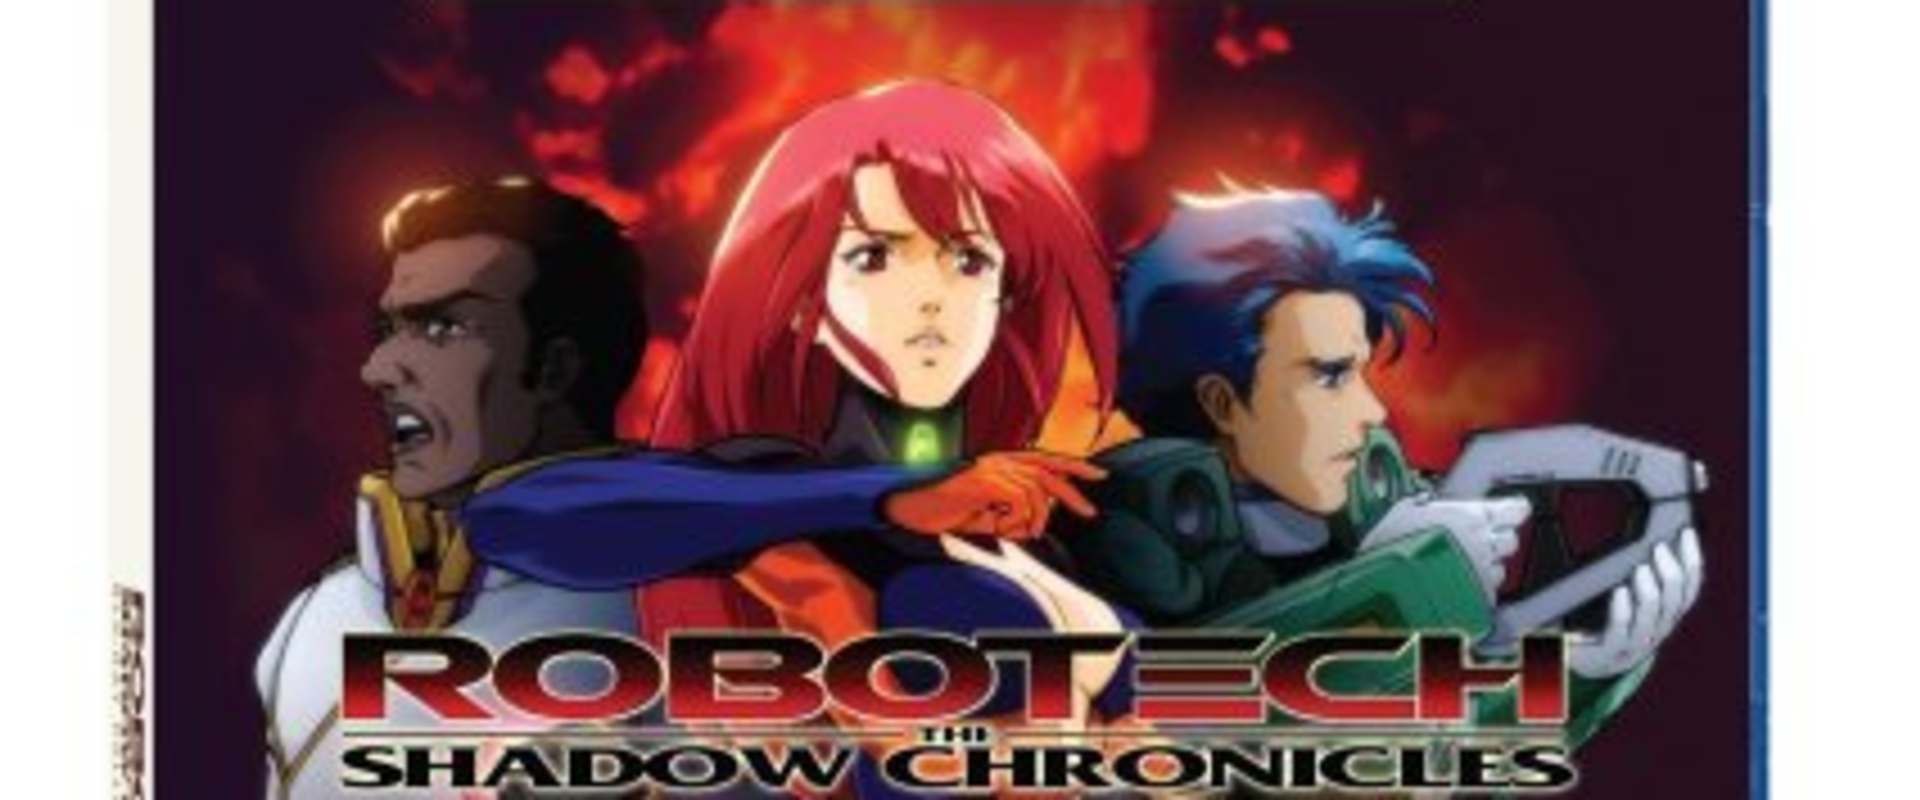 Robotech: The Shadow Chronicles background 1